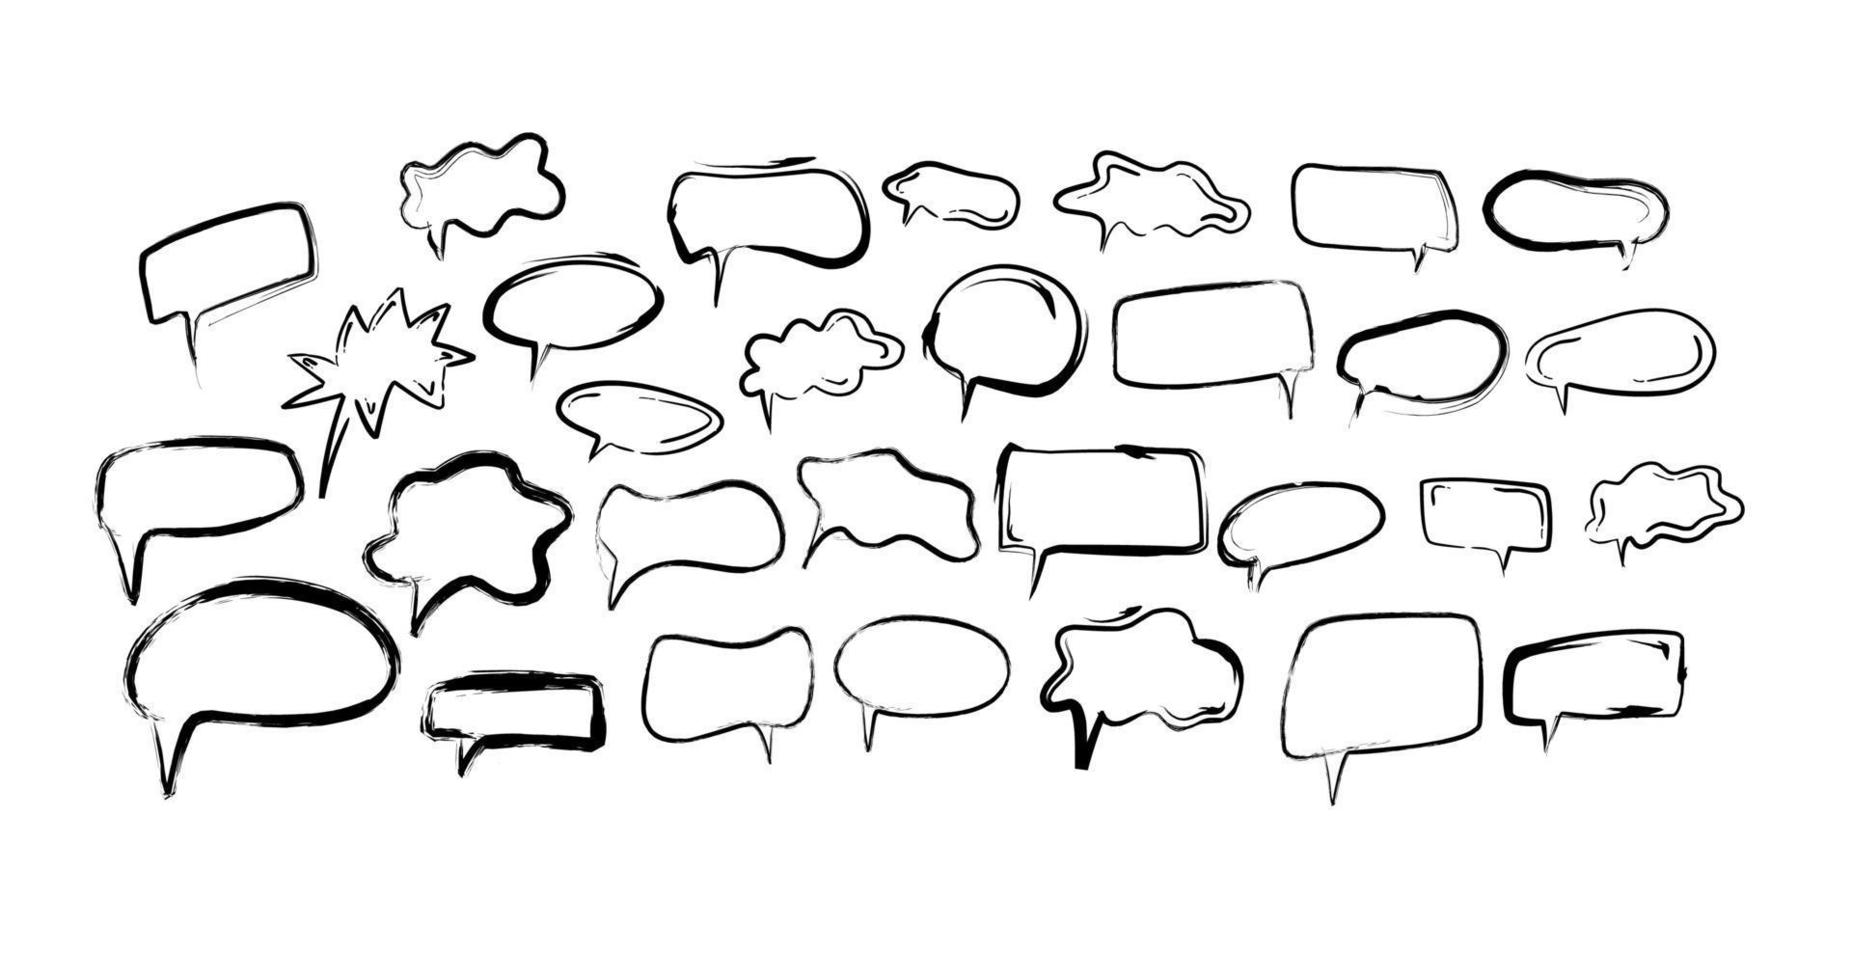 doodle speech bubbles, chat balloons variety forms vector